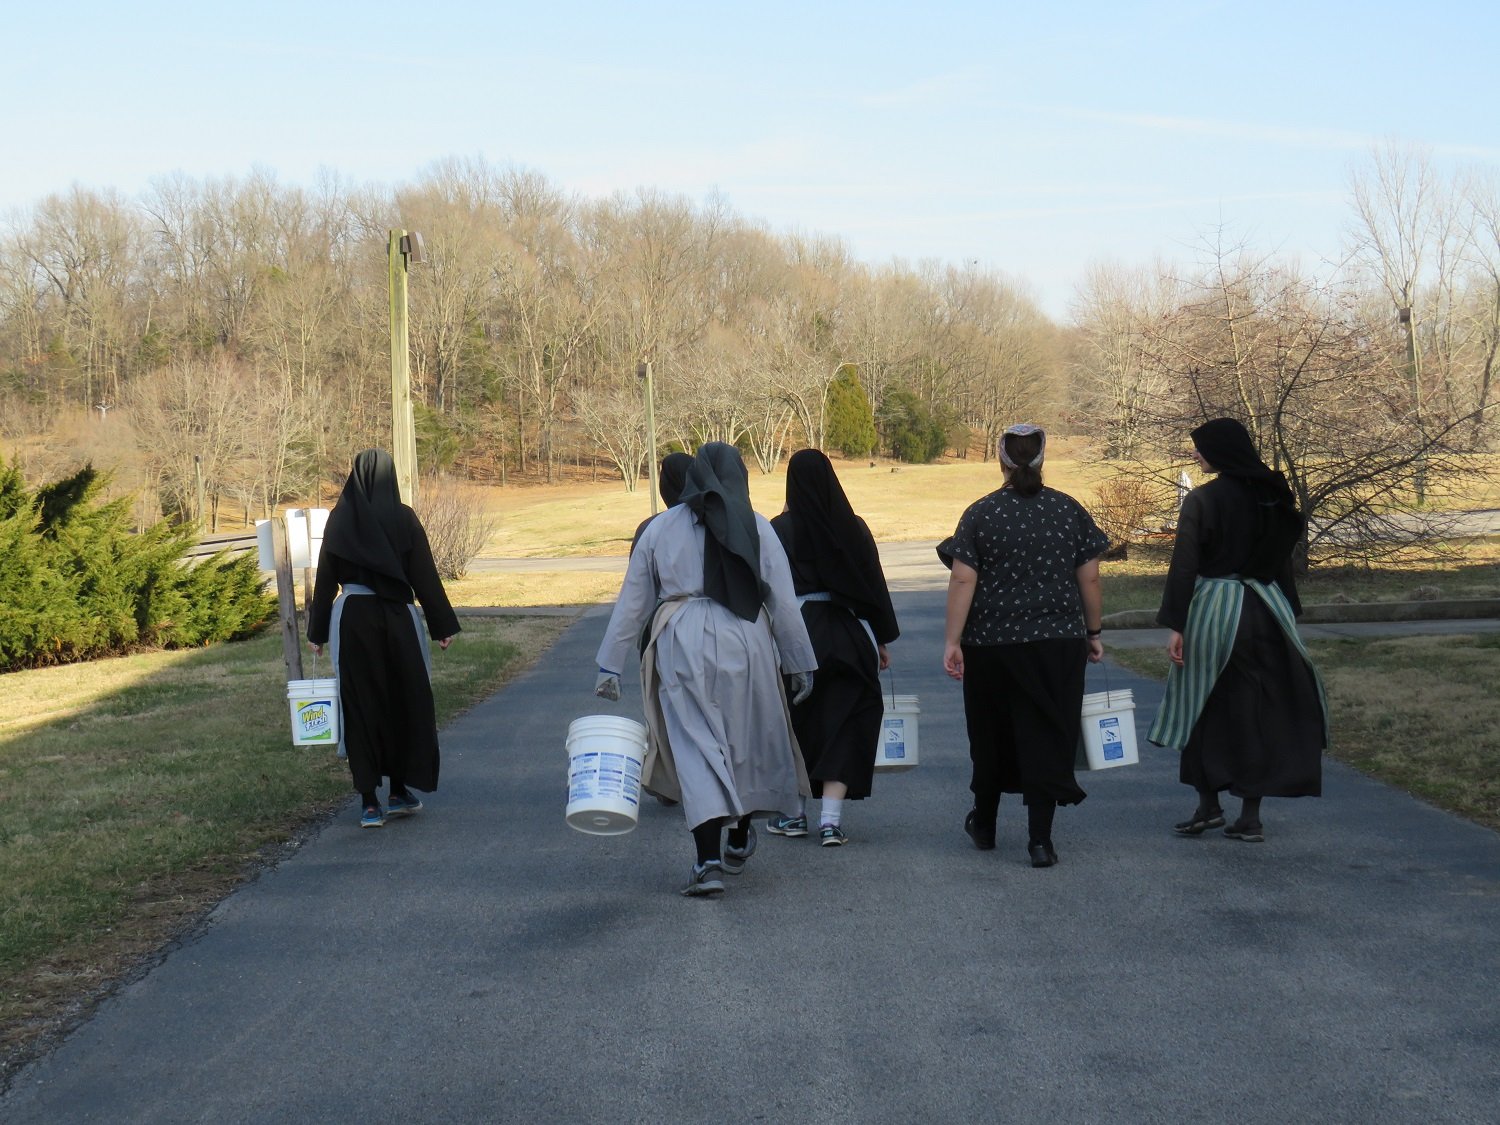  Five nuns (and an aspirant!) on a mission: clean up the property and have fun doing it! 